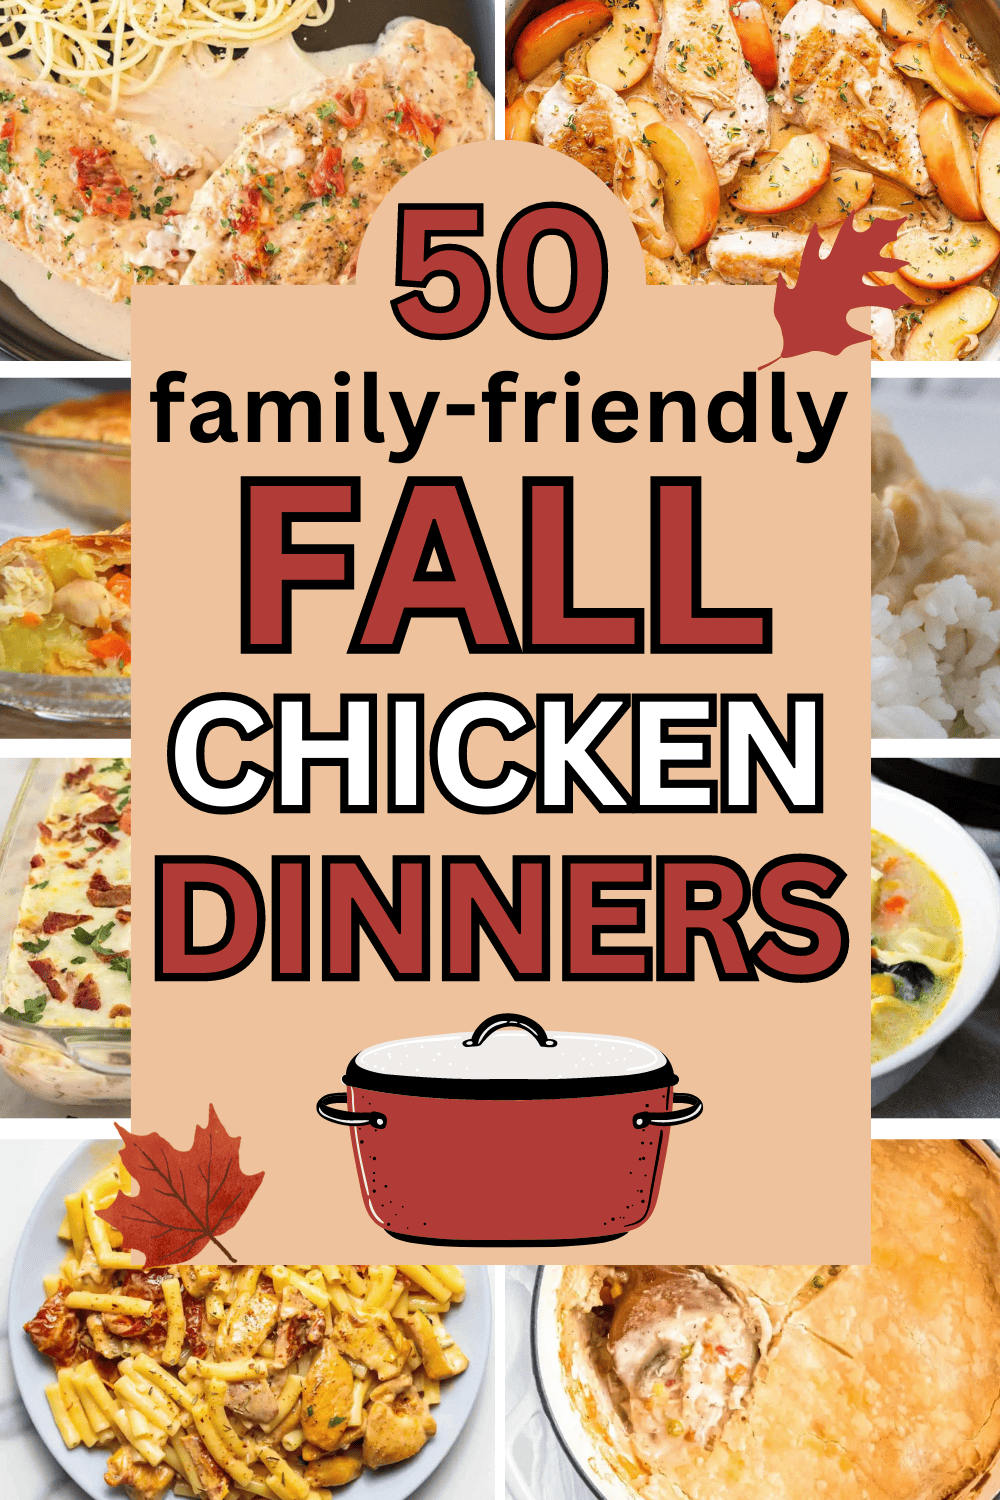 Easy fall dinner ideas with chicken! Fall chicken breast recipes, easy fall dinner ideas chicken, fall dinner ideas chicken thighs, ​​easy fall dinner ideas healthy chicken, fall family dinner ideas healthy, weekday dinner ideas families chicken, fall sunday dinner ideas chicken, healthy fall chicken dinner ideas, healthy fall recipes dinner, fall dinner ideas crock pot chicken, easy fall recipes dinner chicken, cozy fall dinner recipes chicken, autumn dinner recipes, fall food ideas dinners.